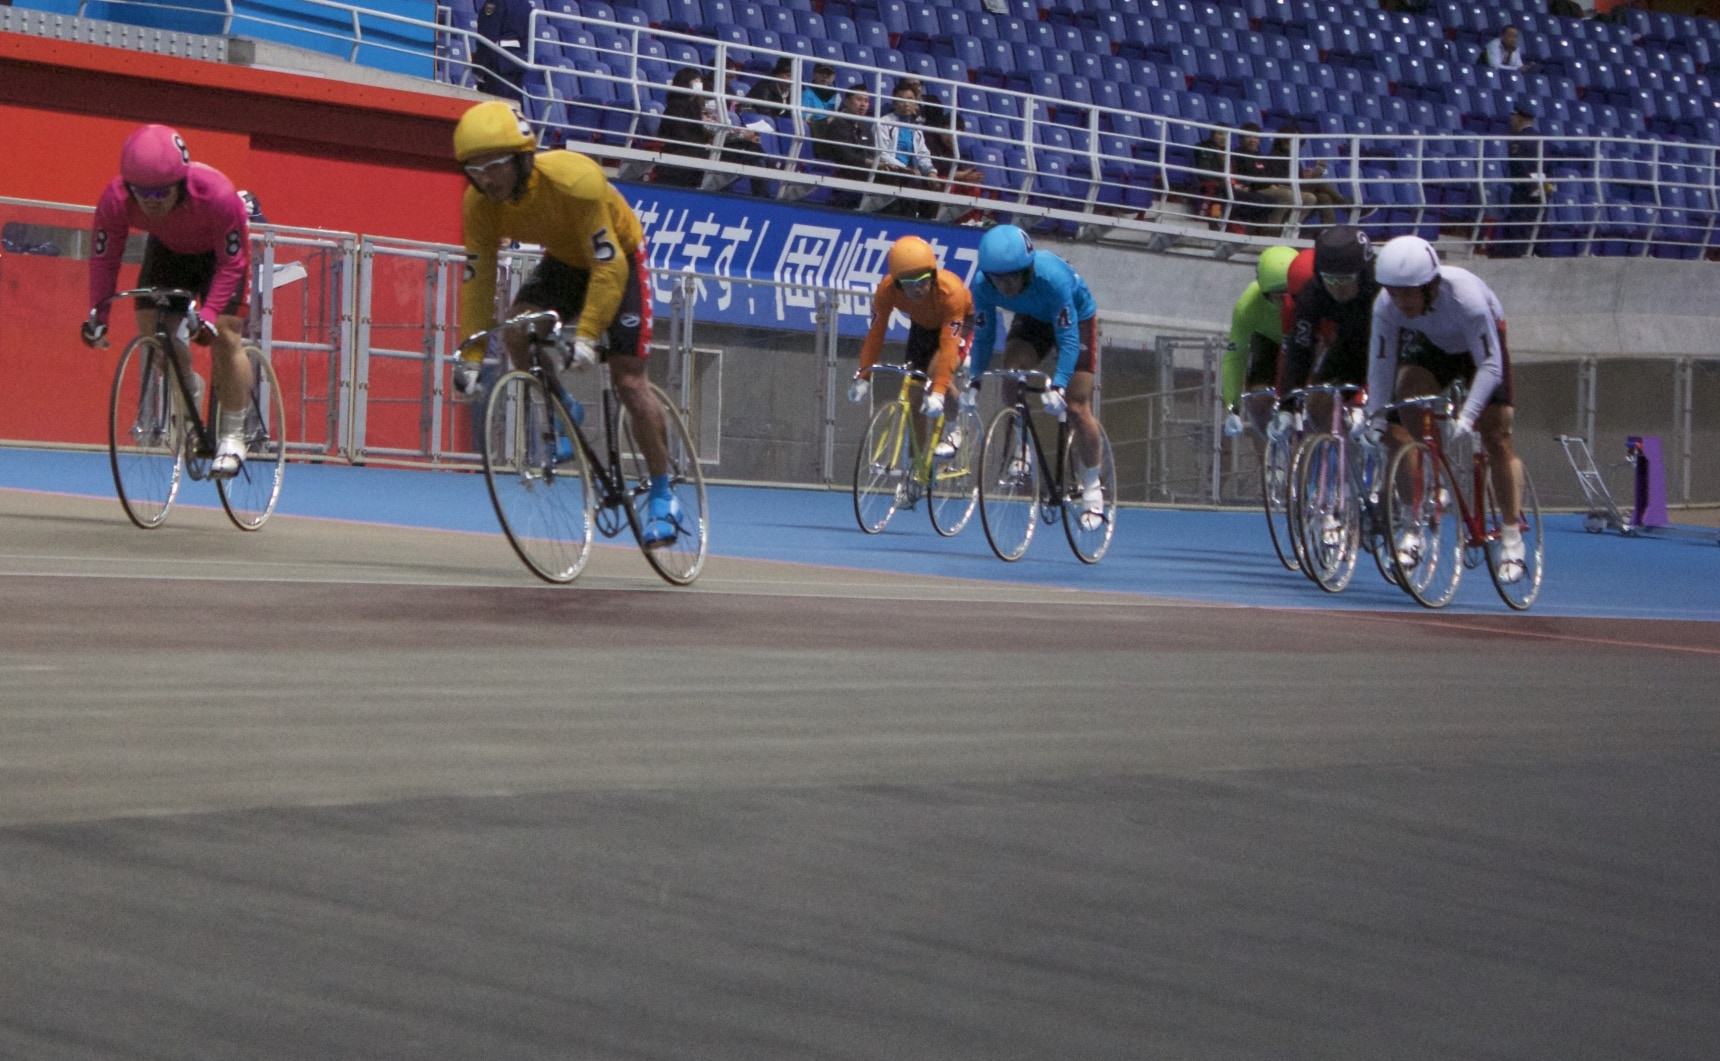 Good Reads: "War on Wheels" and Keirin Cycling